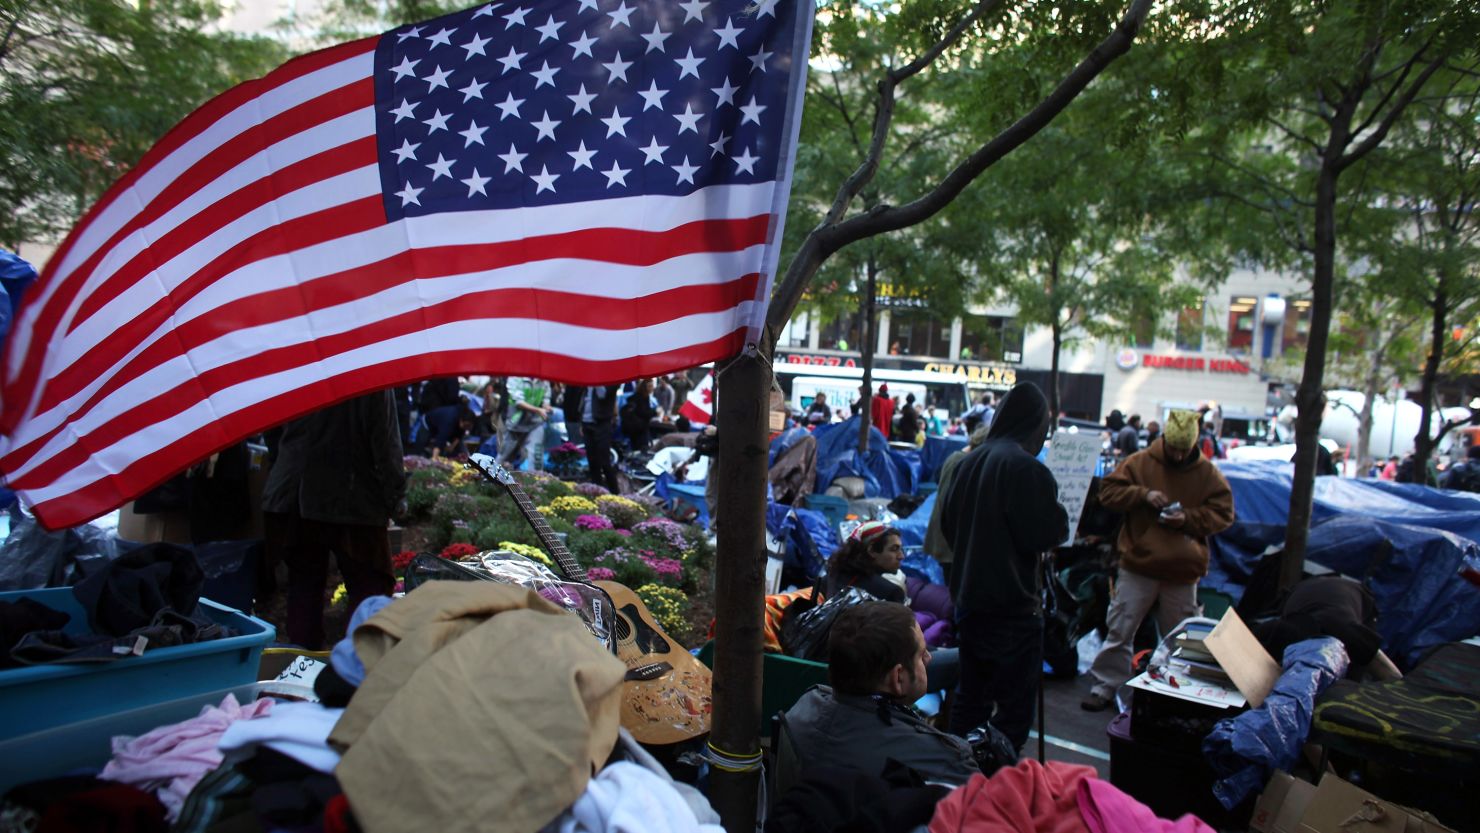 Occupy Wall Street protesters remain in New York's Zuccotti Park on Monday, 31 days after the movement began.